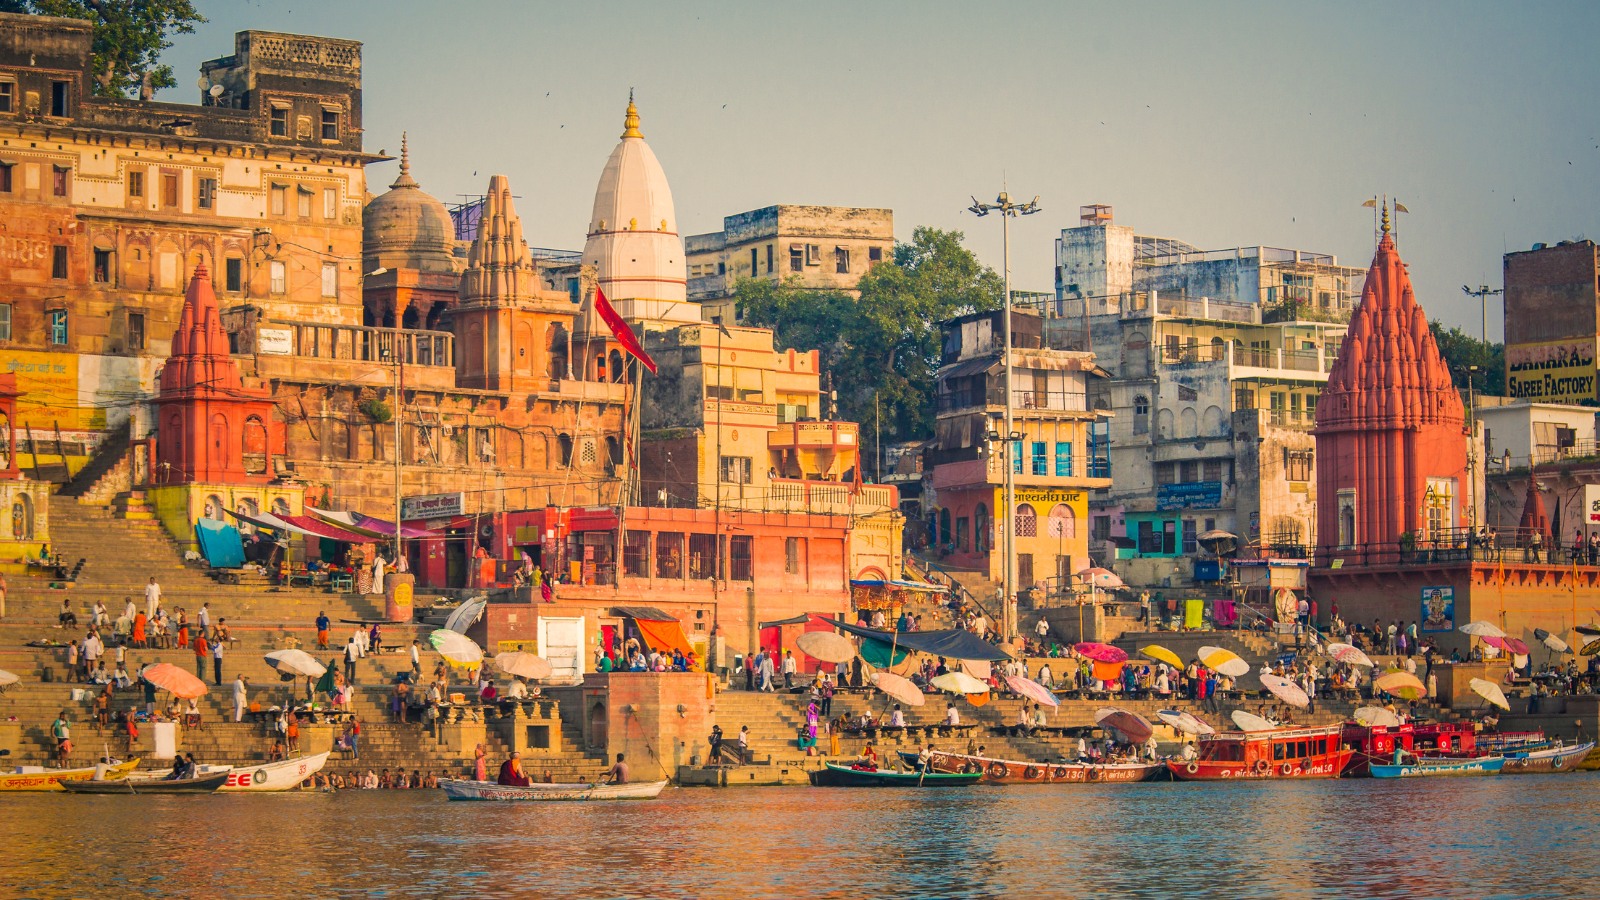 <p>India, a land of diverse cultures and breathtaking landscapes, offers an array of captivating places to visit. At the heart of the Ganges Valley of North India is Varanasi, the spiritual capital of India.</p><p>Since it’s one of the oldest inhabited cities, you will be mesmerized by its rich heritage and vibrant culture. Temples at almost every turn engulf Varanasi, but the Kashi Vishwanath Temple is the most visited and the oldest of the lot. This sacred city is also an important destination for Buddhists because Gautam Buddha preached his first sermon in Sarnath, a city located near Varanasi.</p>